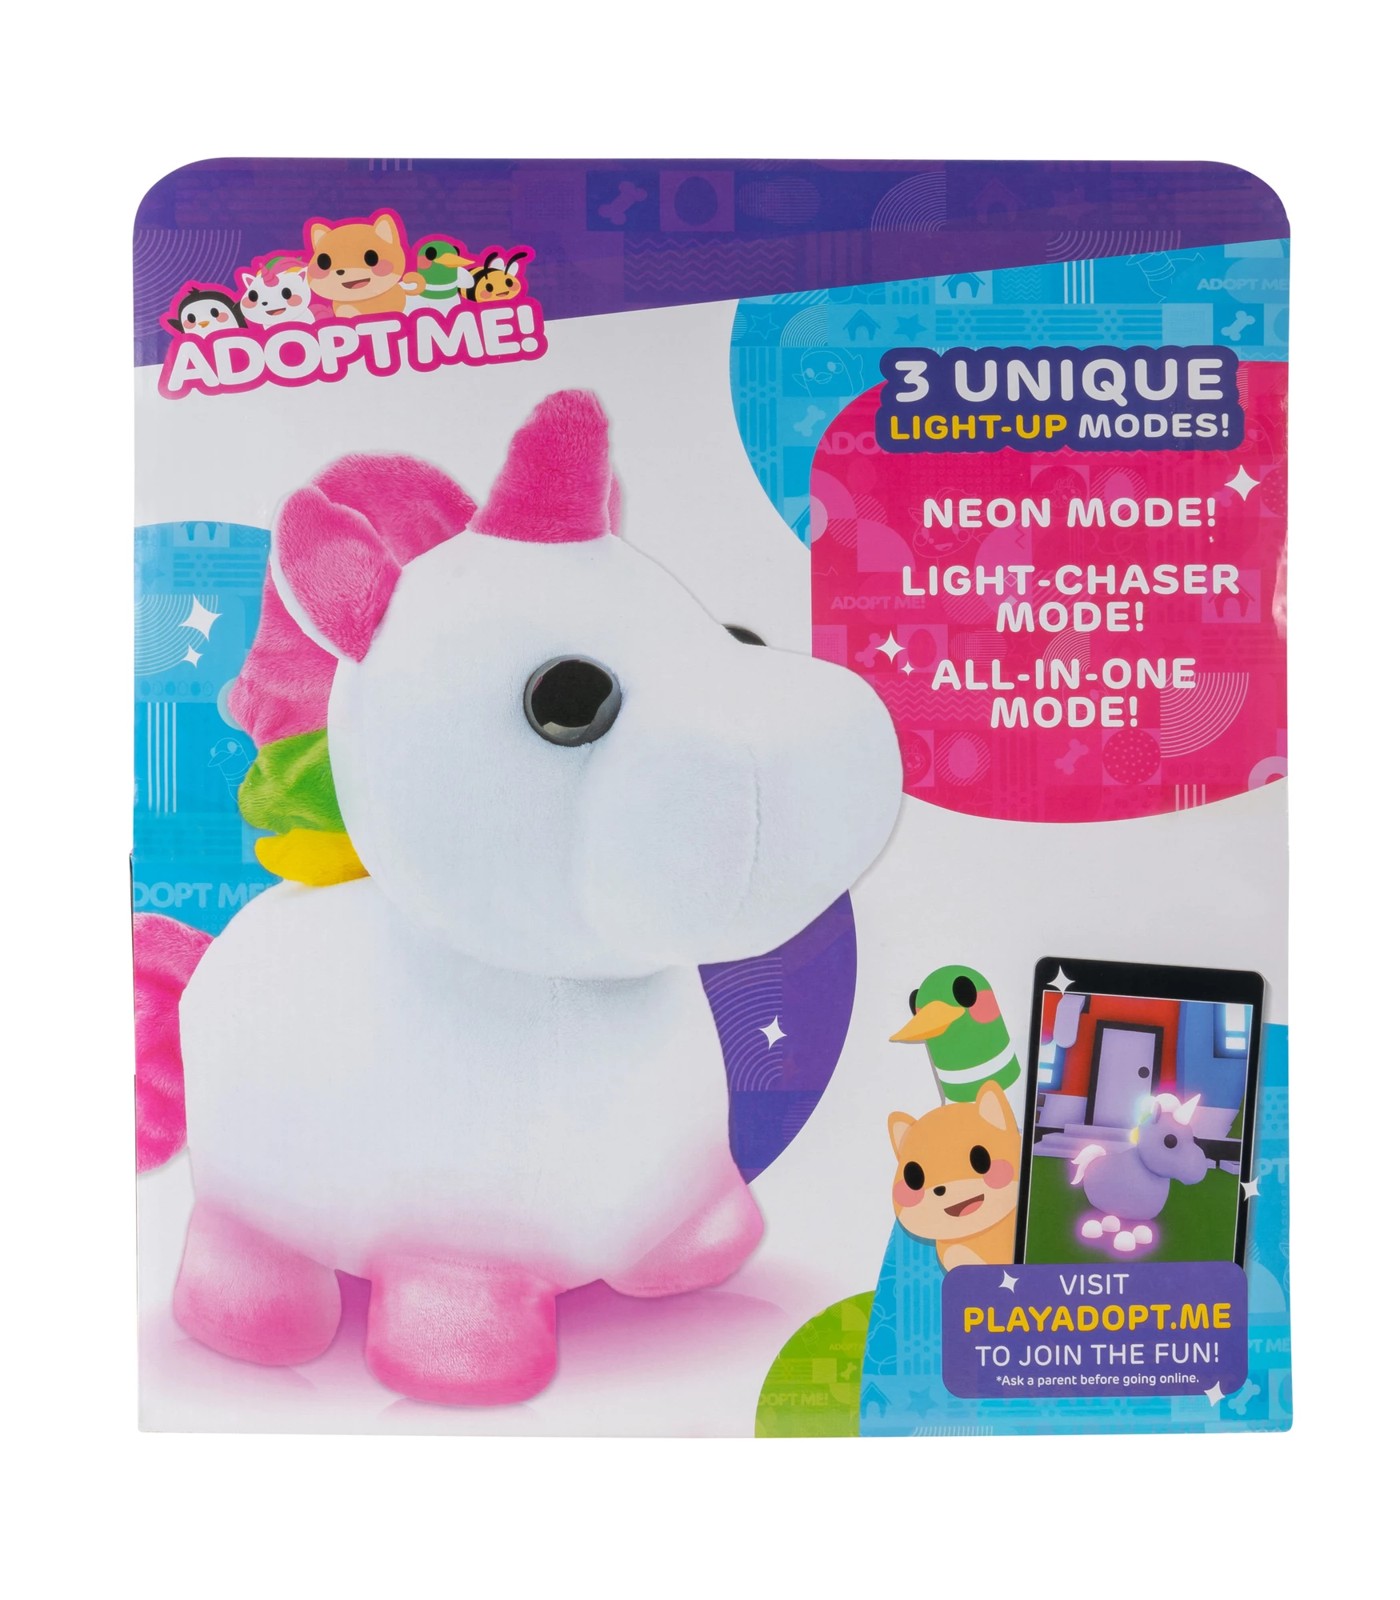  Adopt Me! Neon Unicorn Light-Up Plush - Soft and Cuddly - Three  Light-Up Modes - Directly from The #1 Game, Exclusive Virtual Item Code  Included - Toys for Kids - Ages